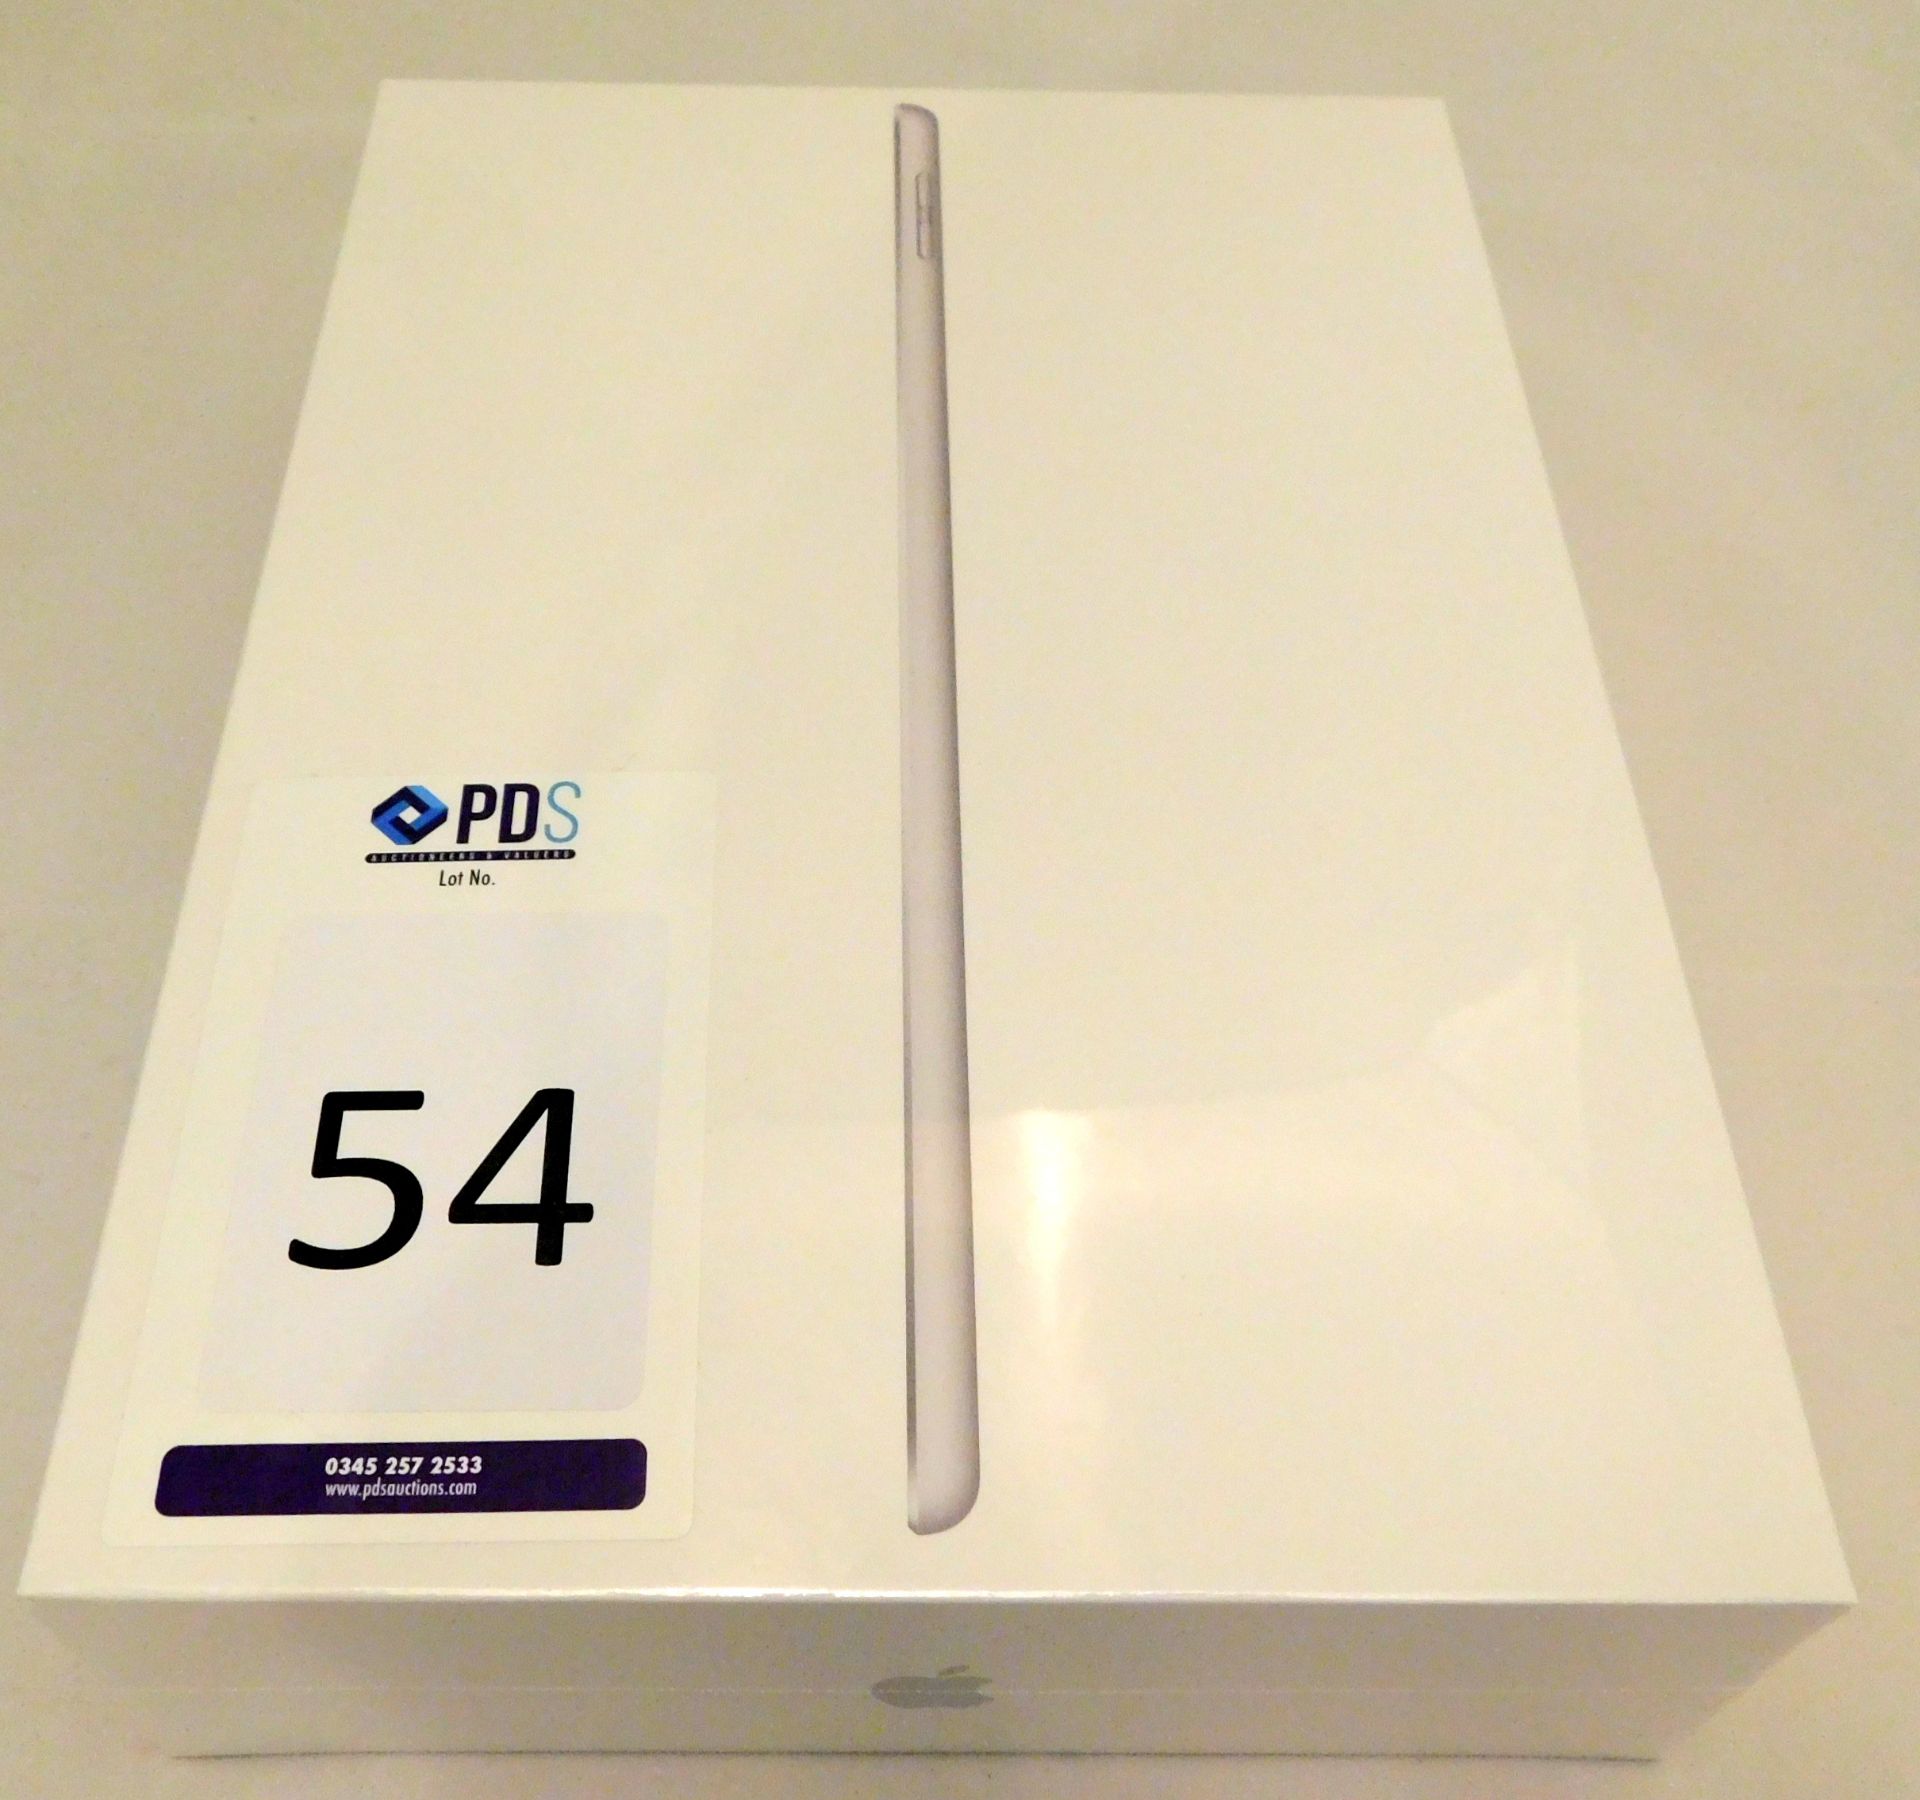 Apple A2197 iPad, 7th Gen, 32GB, Silver, Serial Number: DMPC80UEMF3N, (New in Sealed Box) (Located